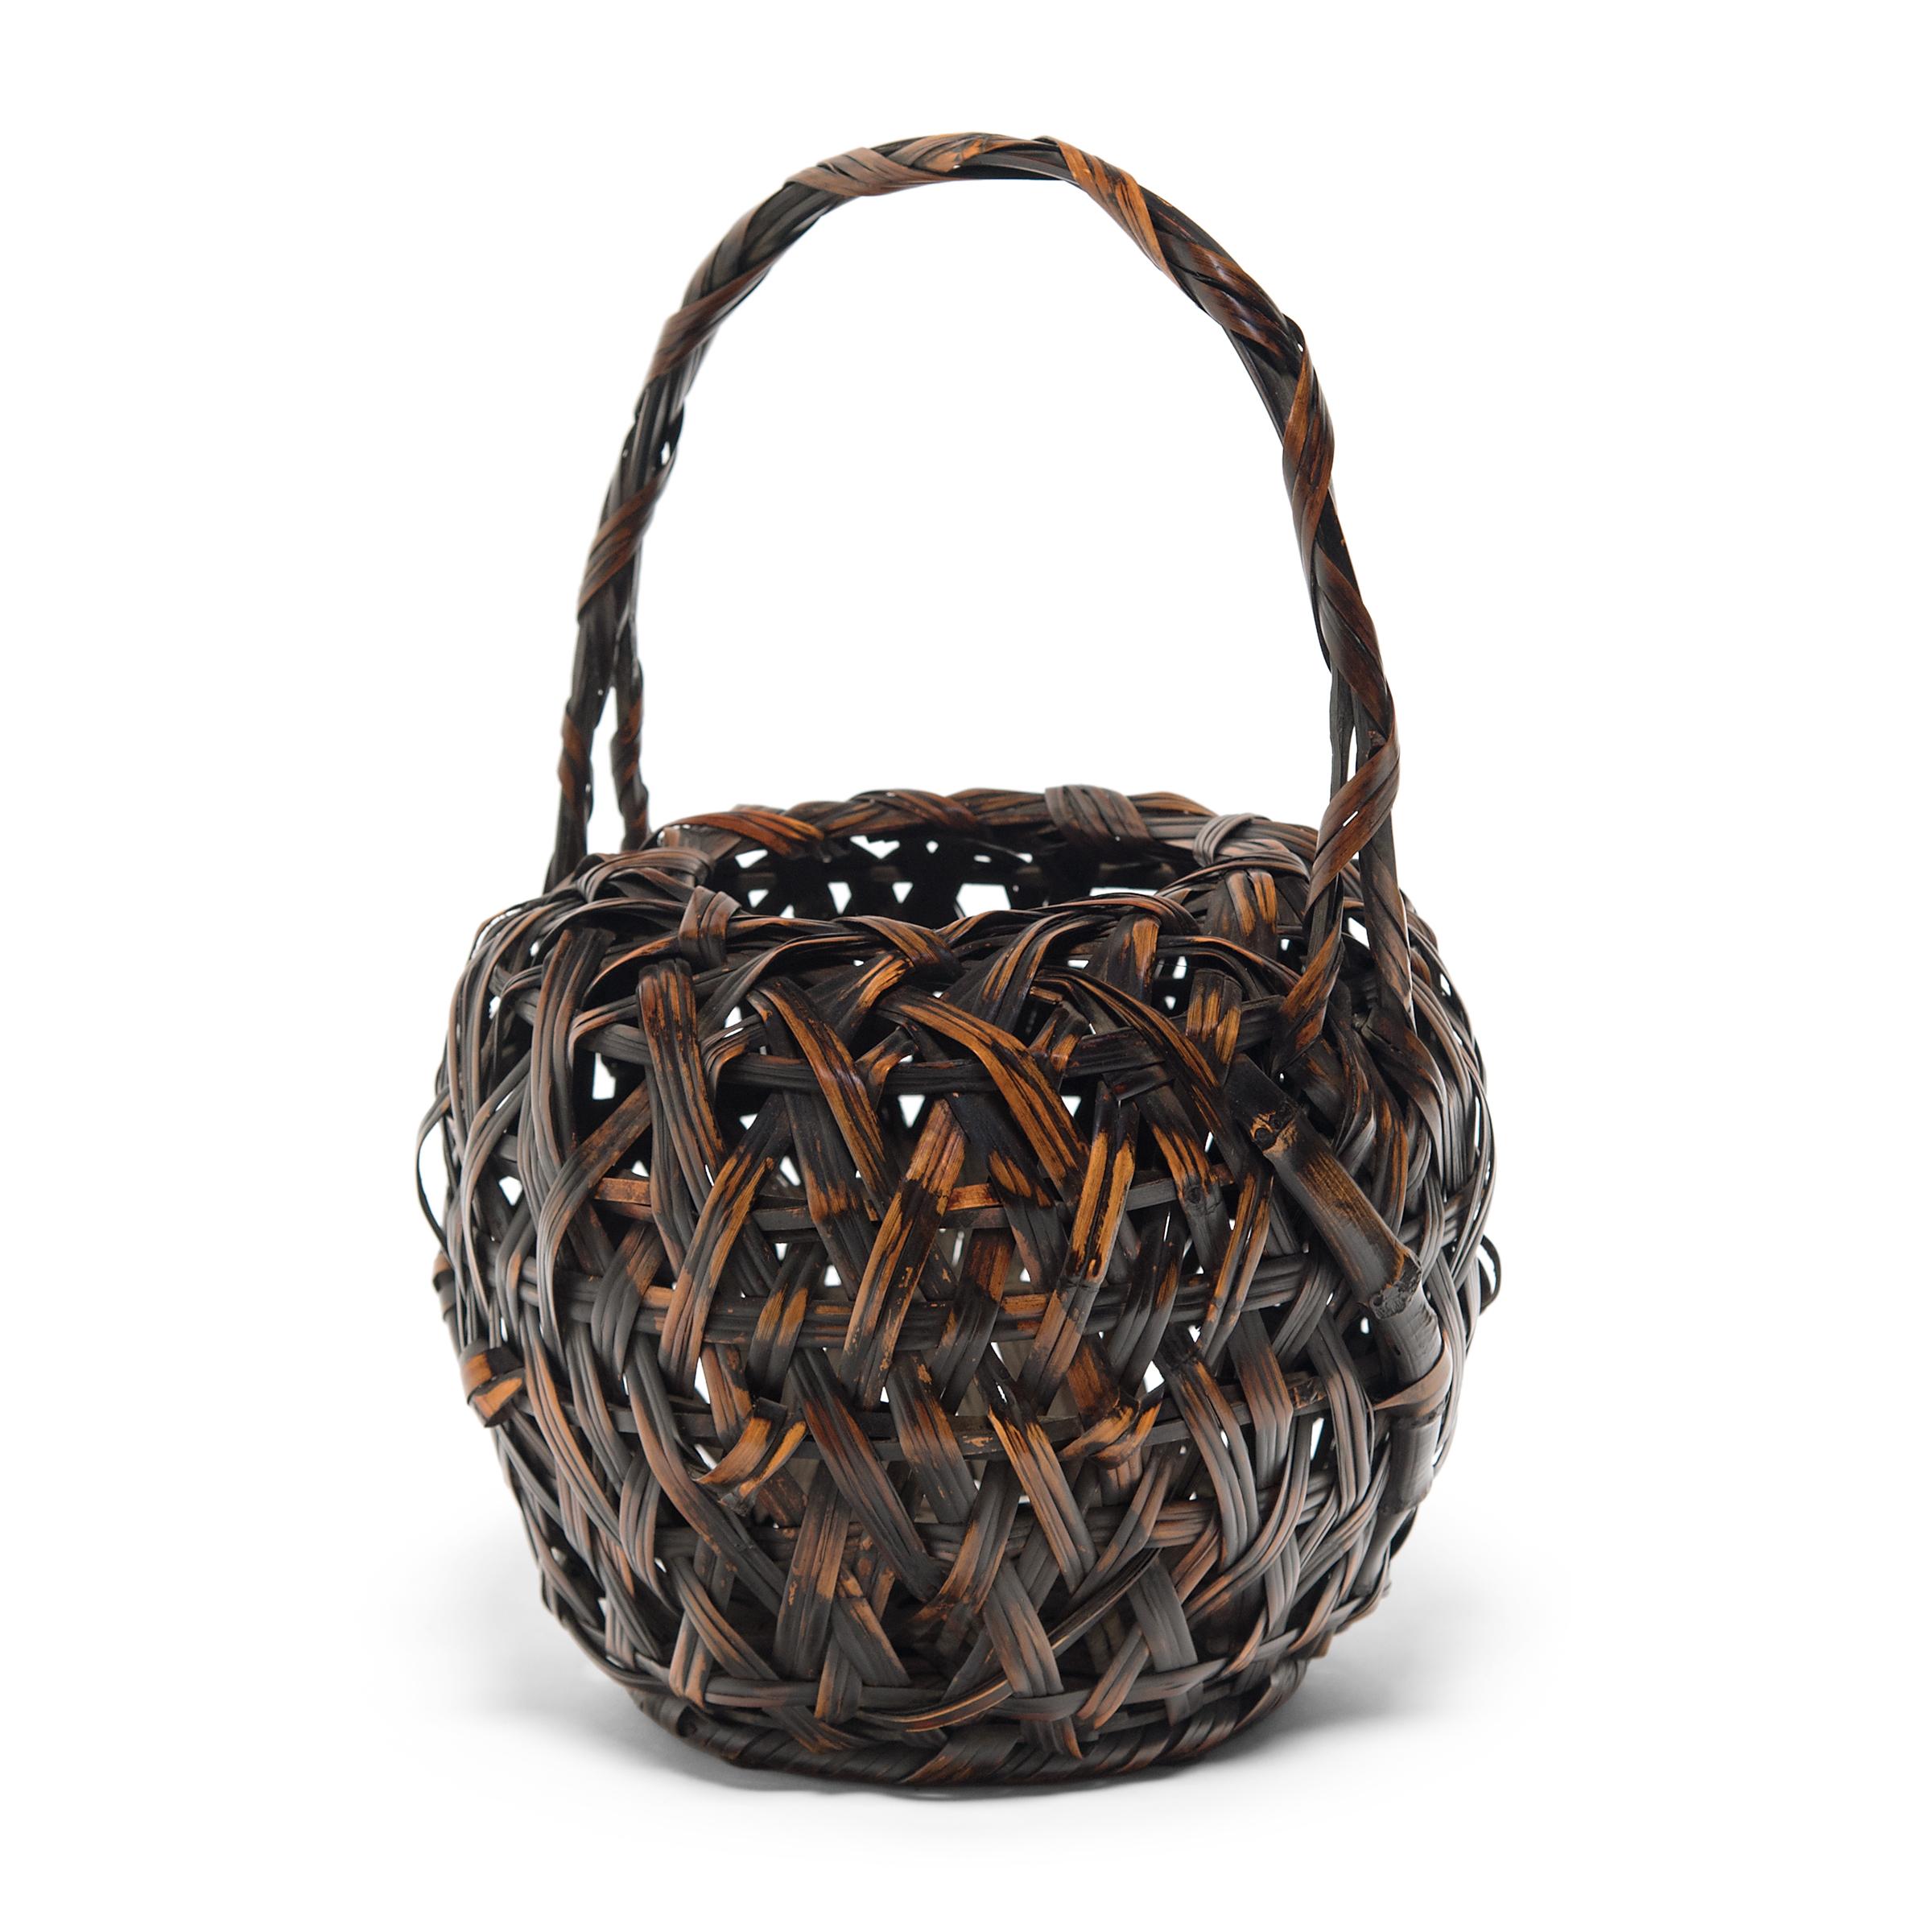 This one of a kind bamboo basket is a late-Meiji era flower basket (hanakago) designed especially for ikebana, the Japanese art of floral arrangement. The basket has a rounded, barrel form and a high, arched handle. The body of the basket is loosely